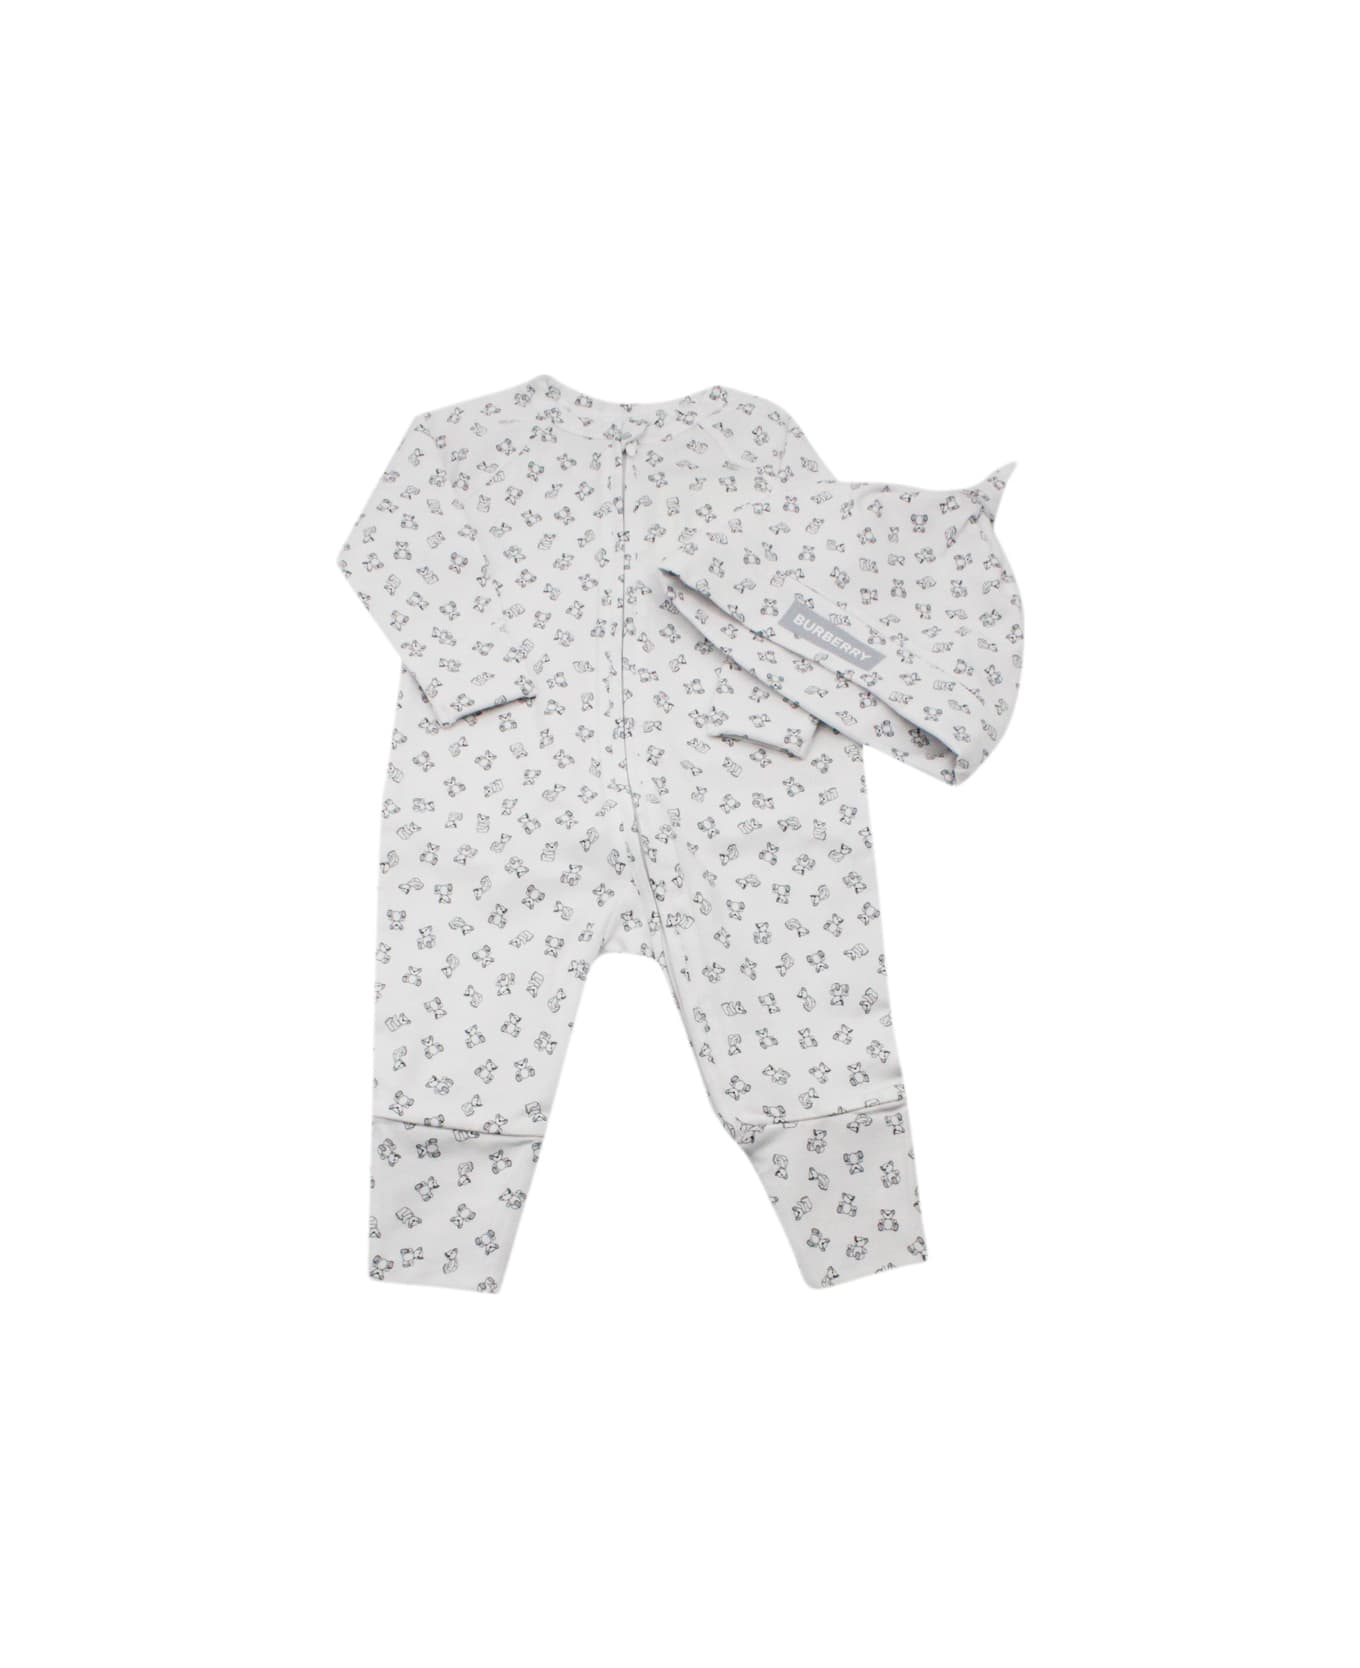 Burberry Complete Gift Set Consisting Of Onesie + Cotton Cap With Thomas Teddy Bear Print - White ボディスーツ＆セットアップ